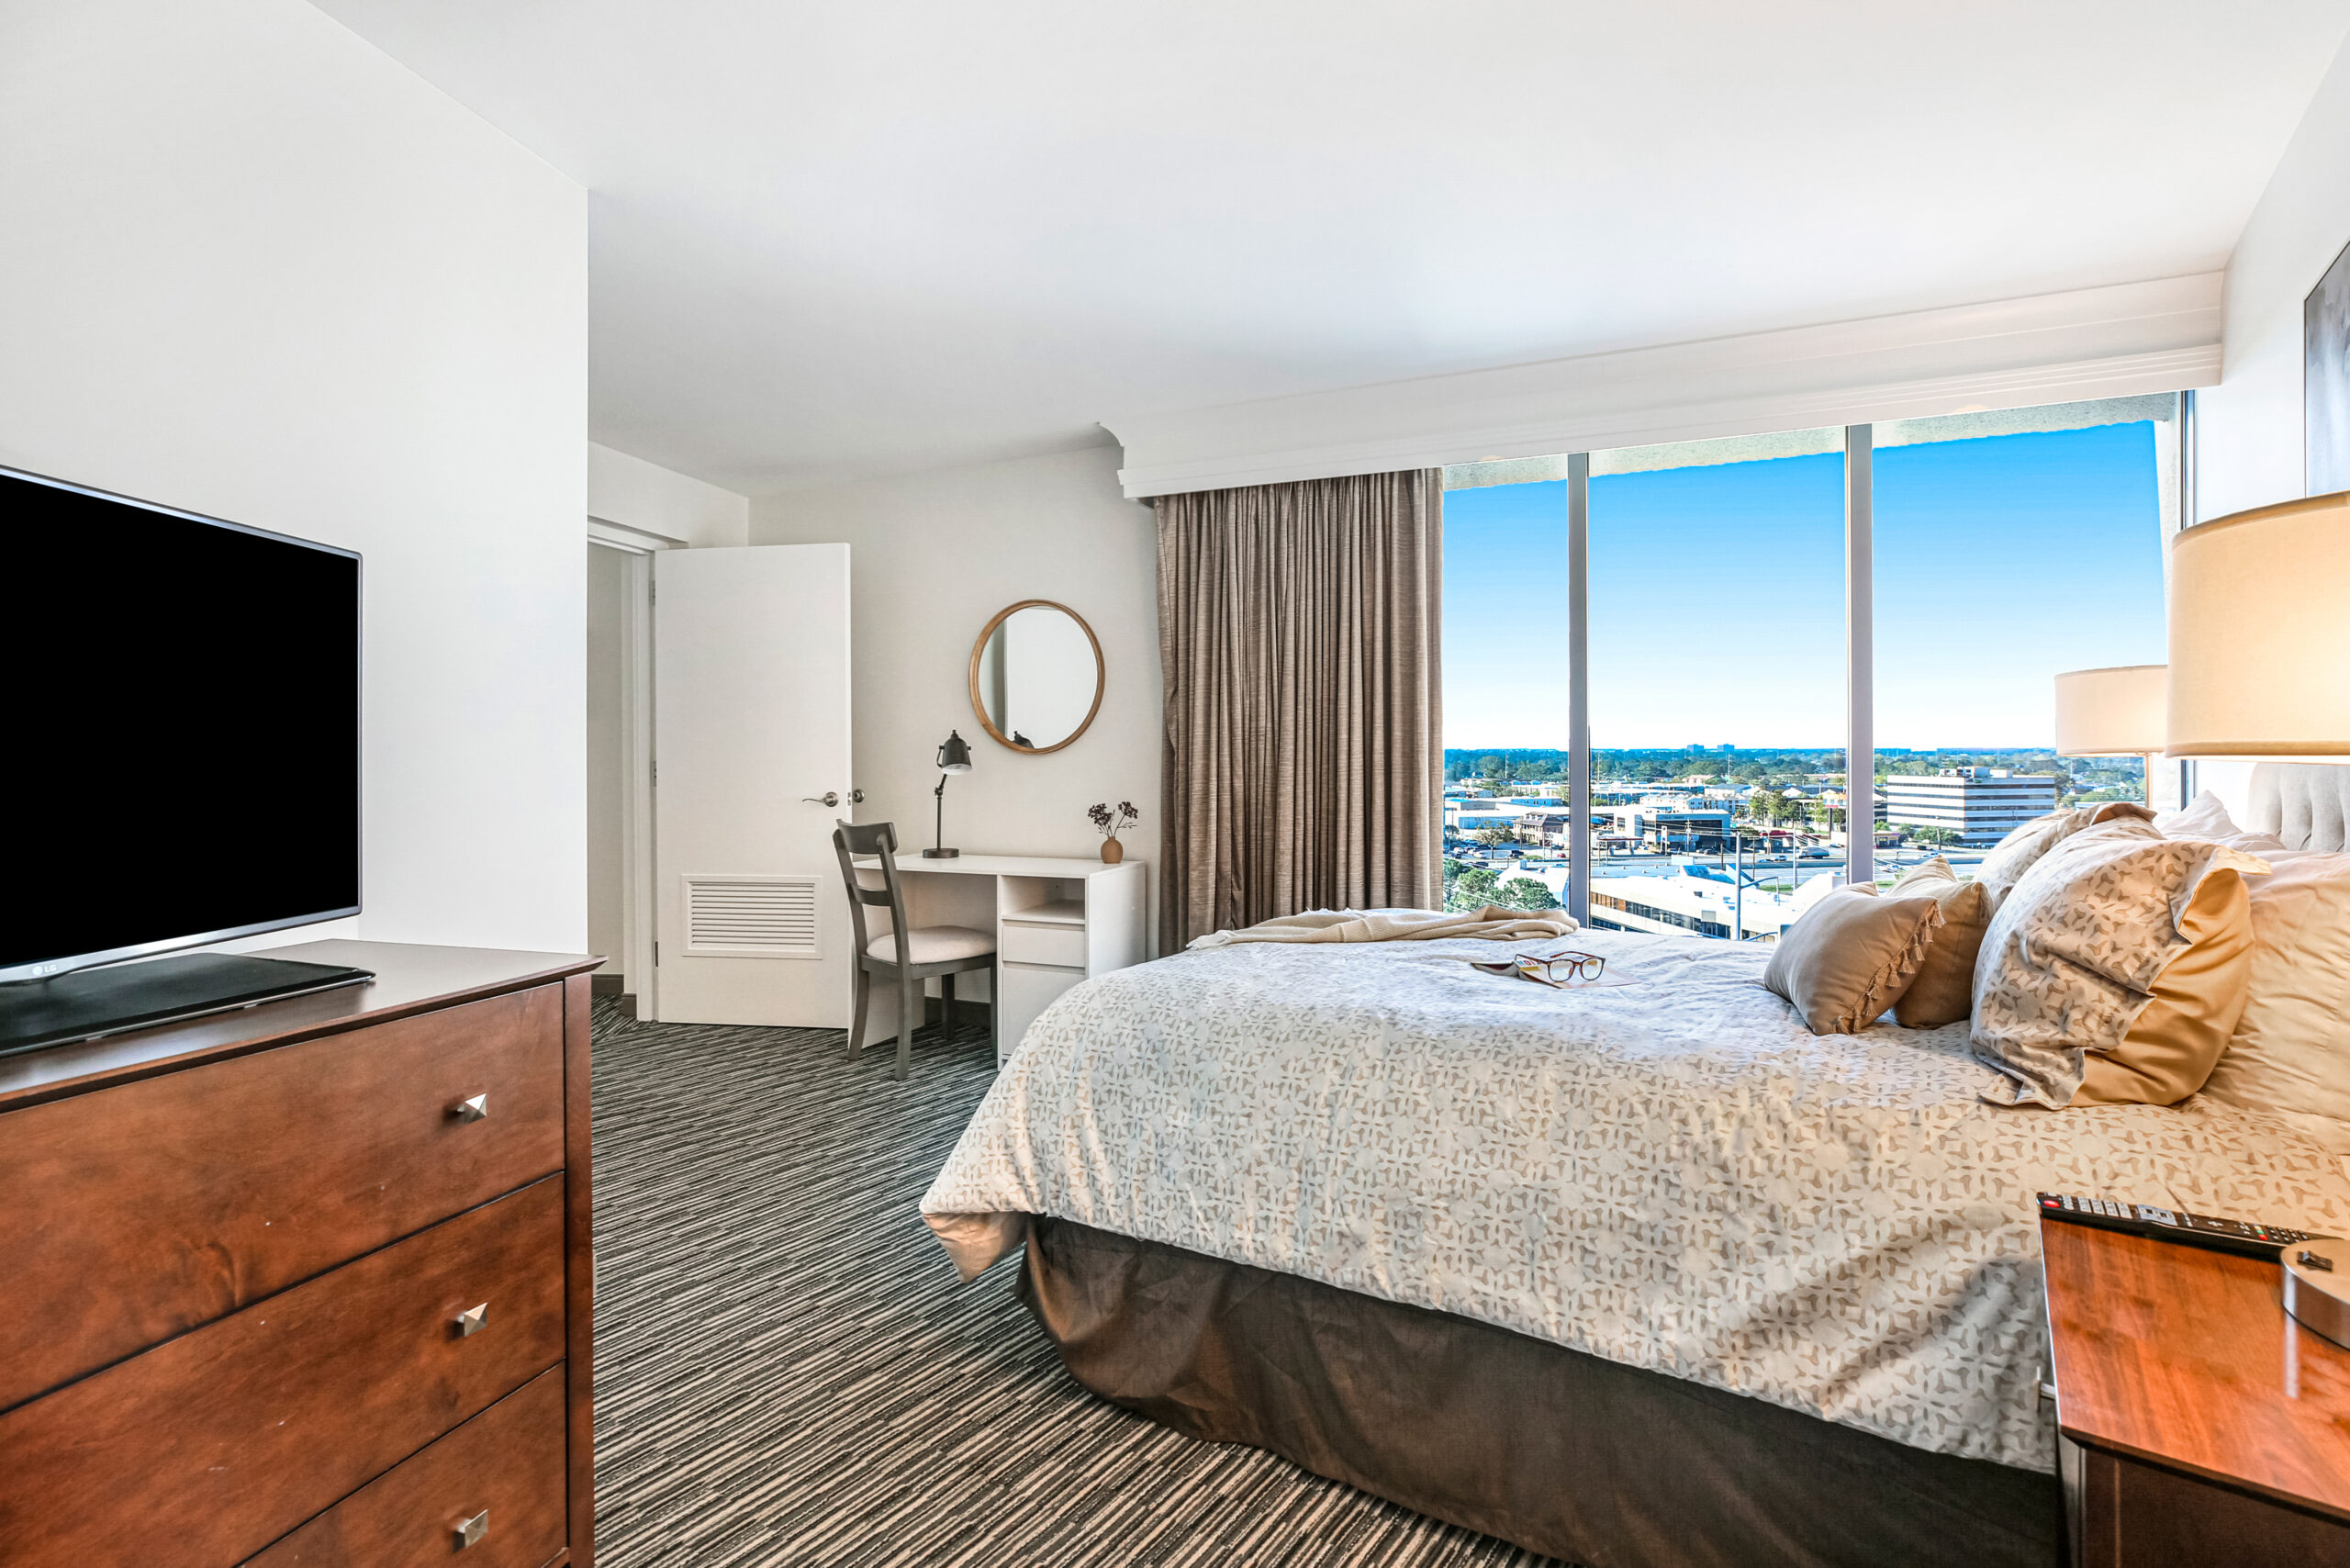 Copeland Tower Living senior apartment bedroom with view of New Orleans skyline